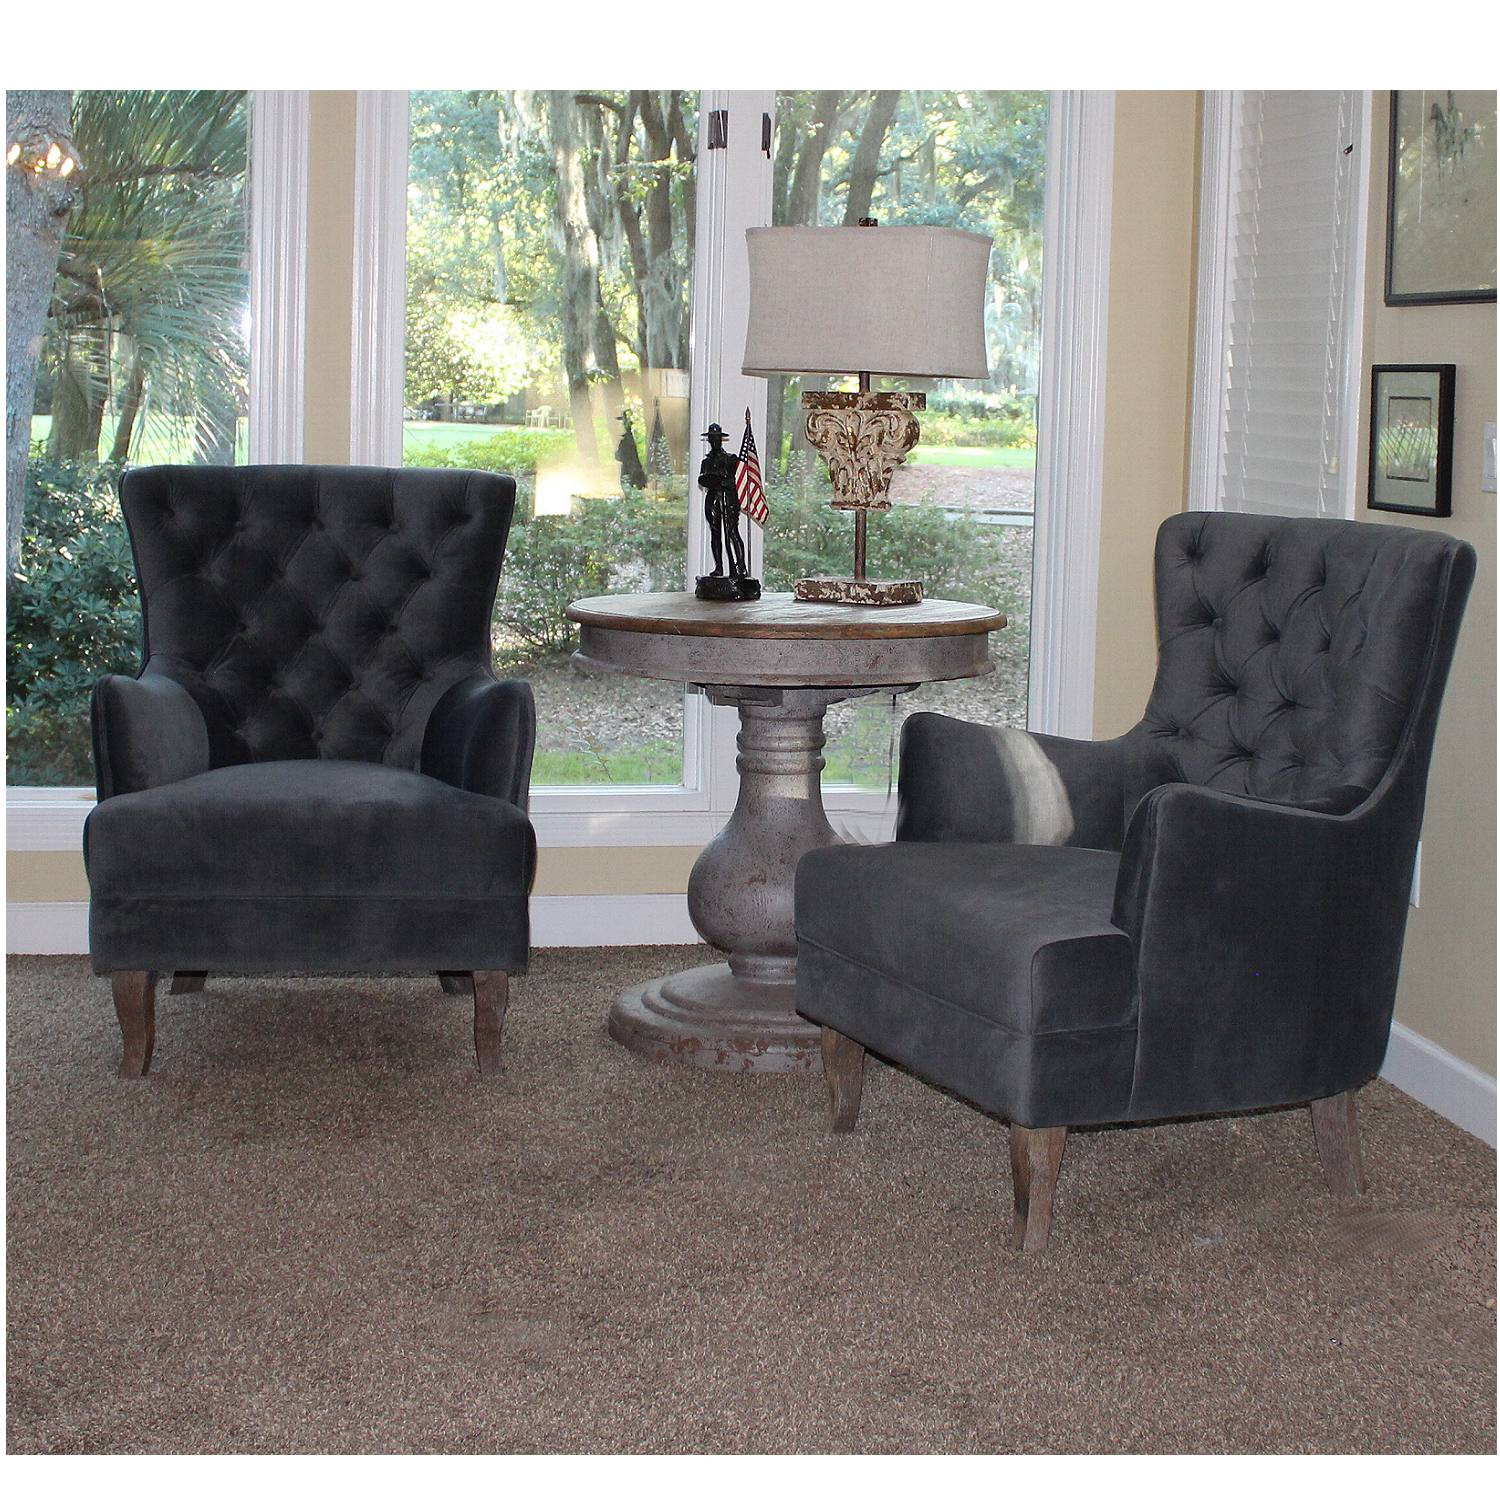 Blue Living Room Chairs
 Arm Chairs in Blue Gray Satin Velvet Tufted Living Room